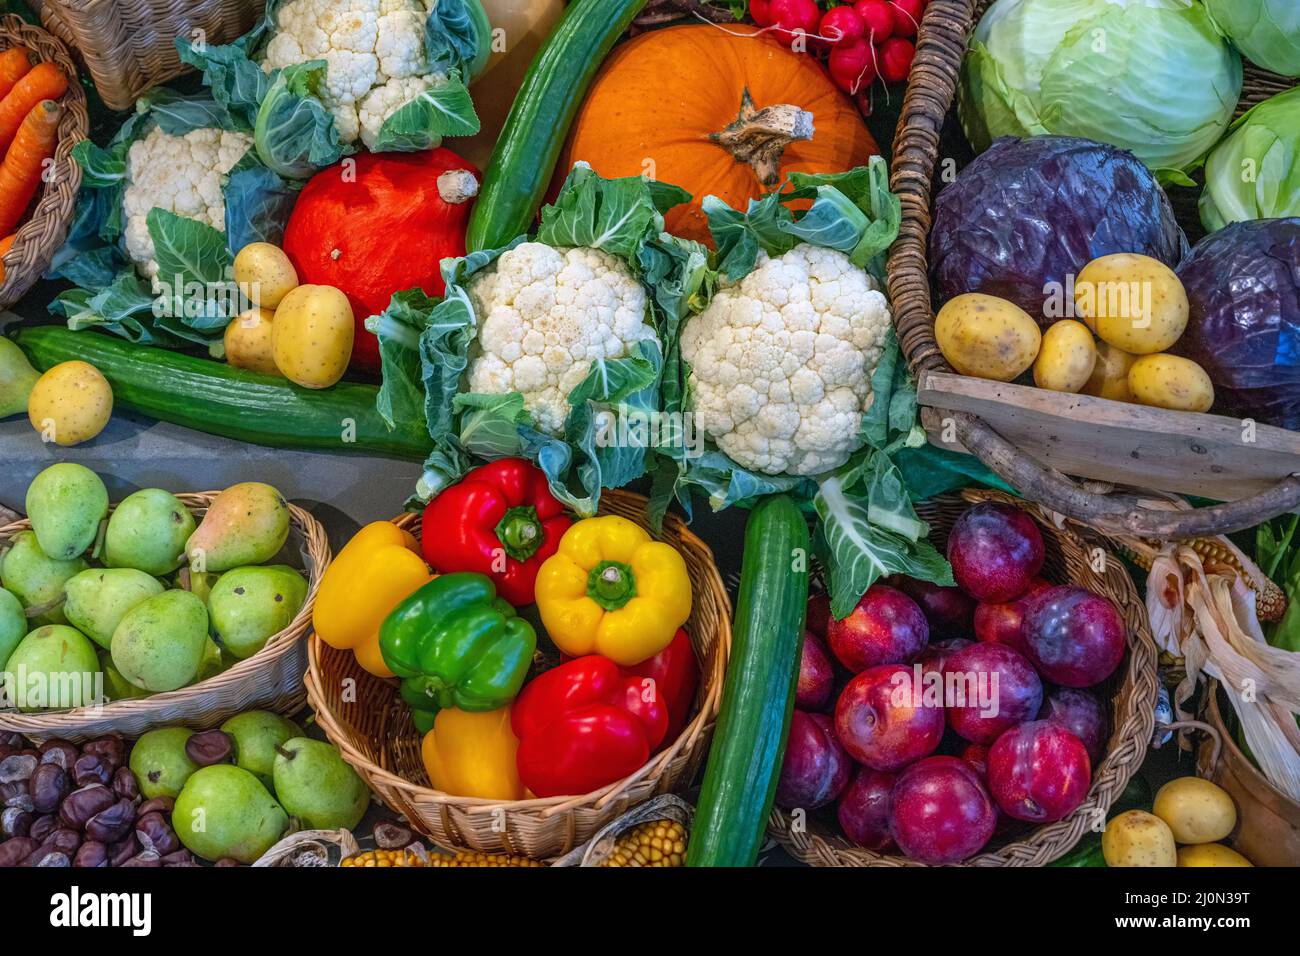 Different kinds of vegetables and fruits for sale on a market Stock Photo